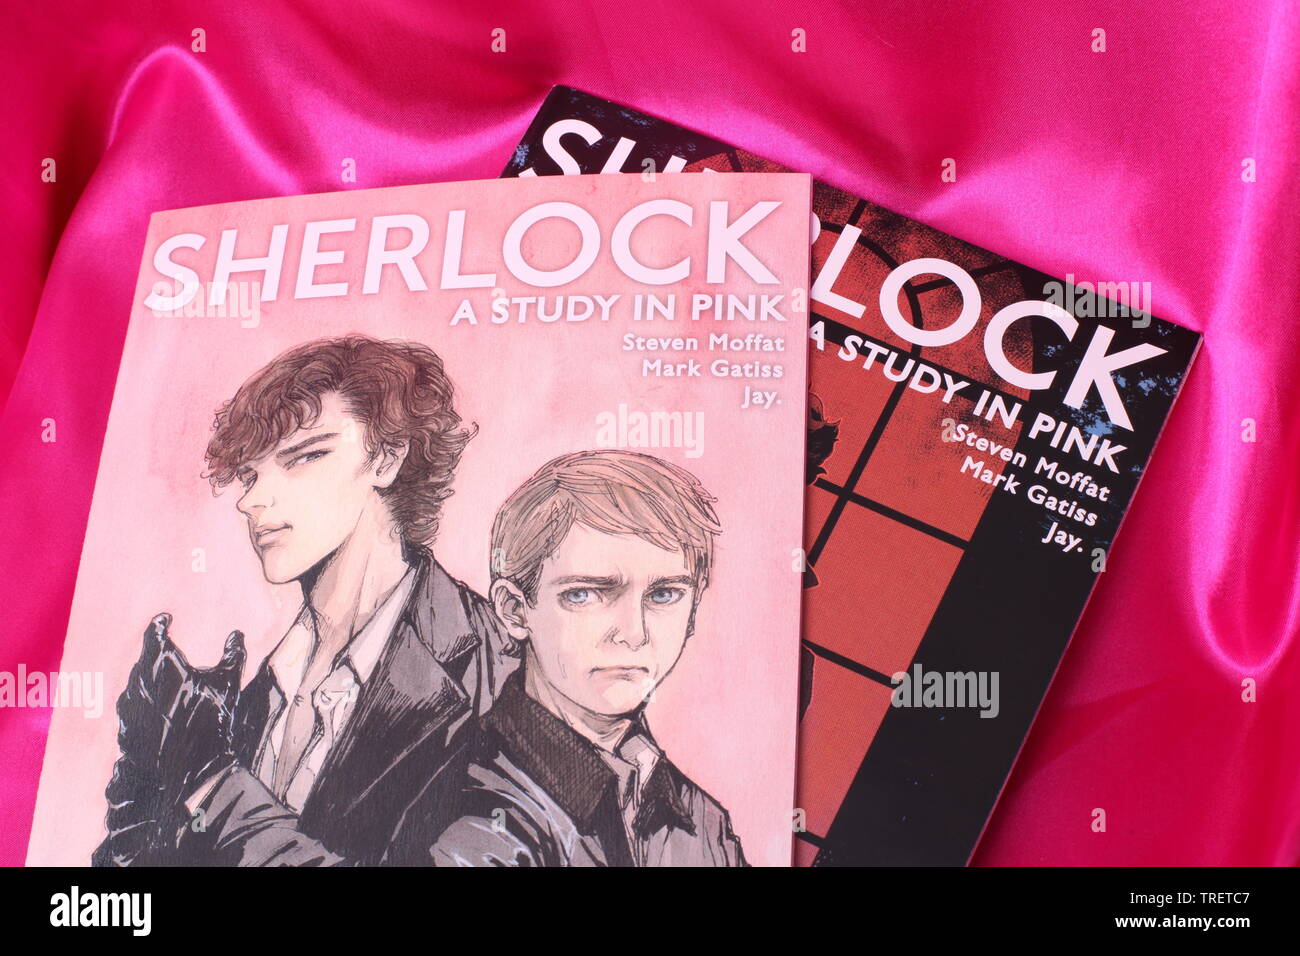 A study in Pink - Sherlock Holmes graphic novel based on the TV Series Sherlock by Steven Moffat and Mark Gatiss, Japanese Manga adaption by Jay Stock Photo